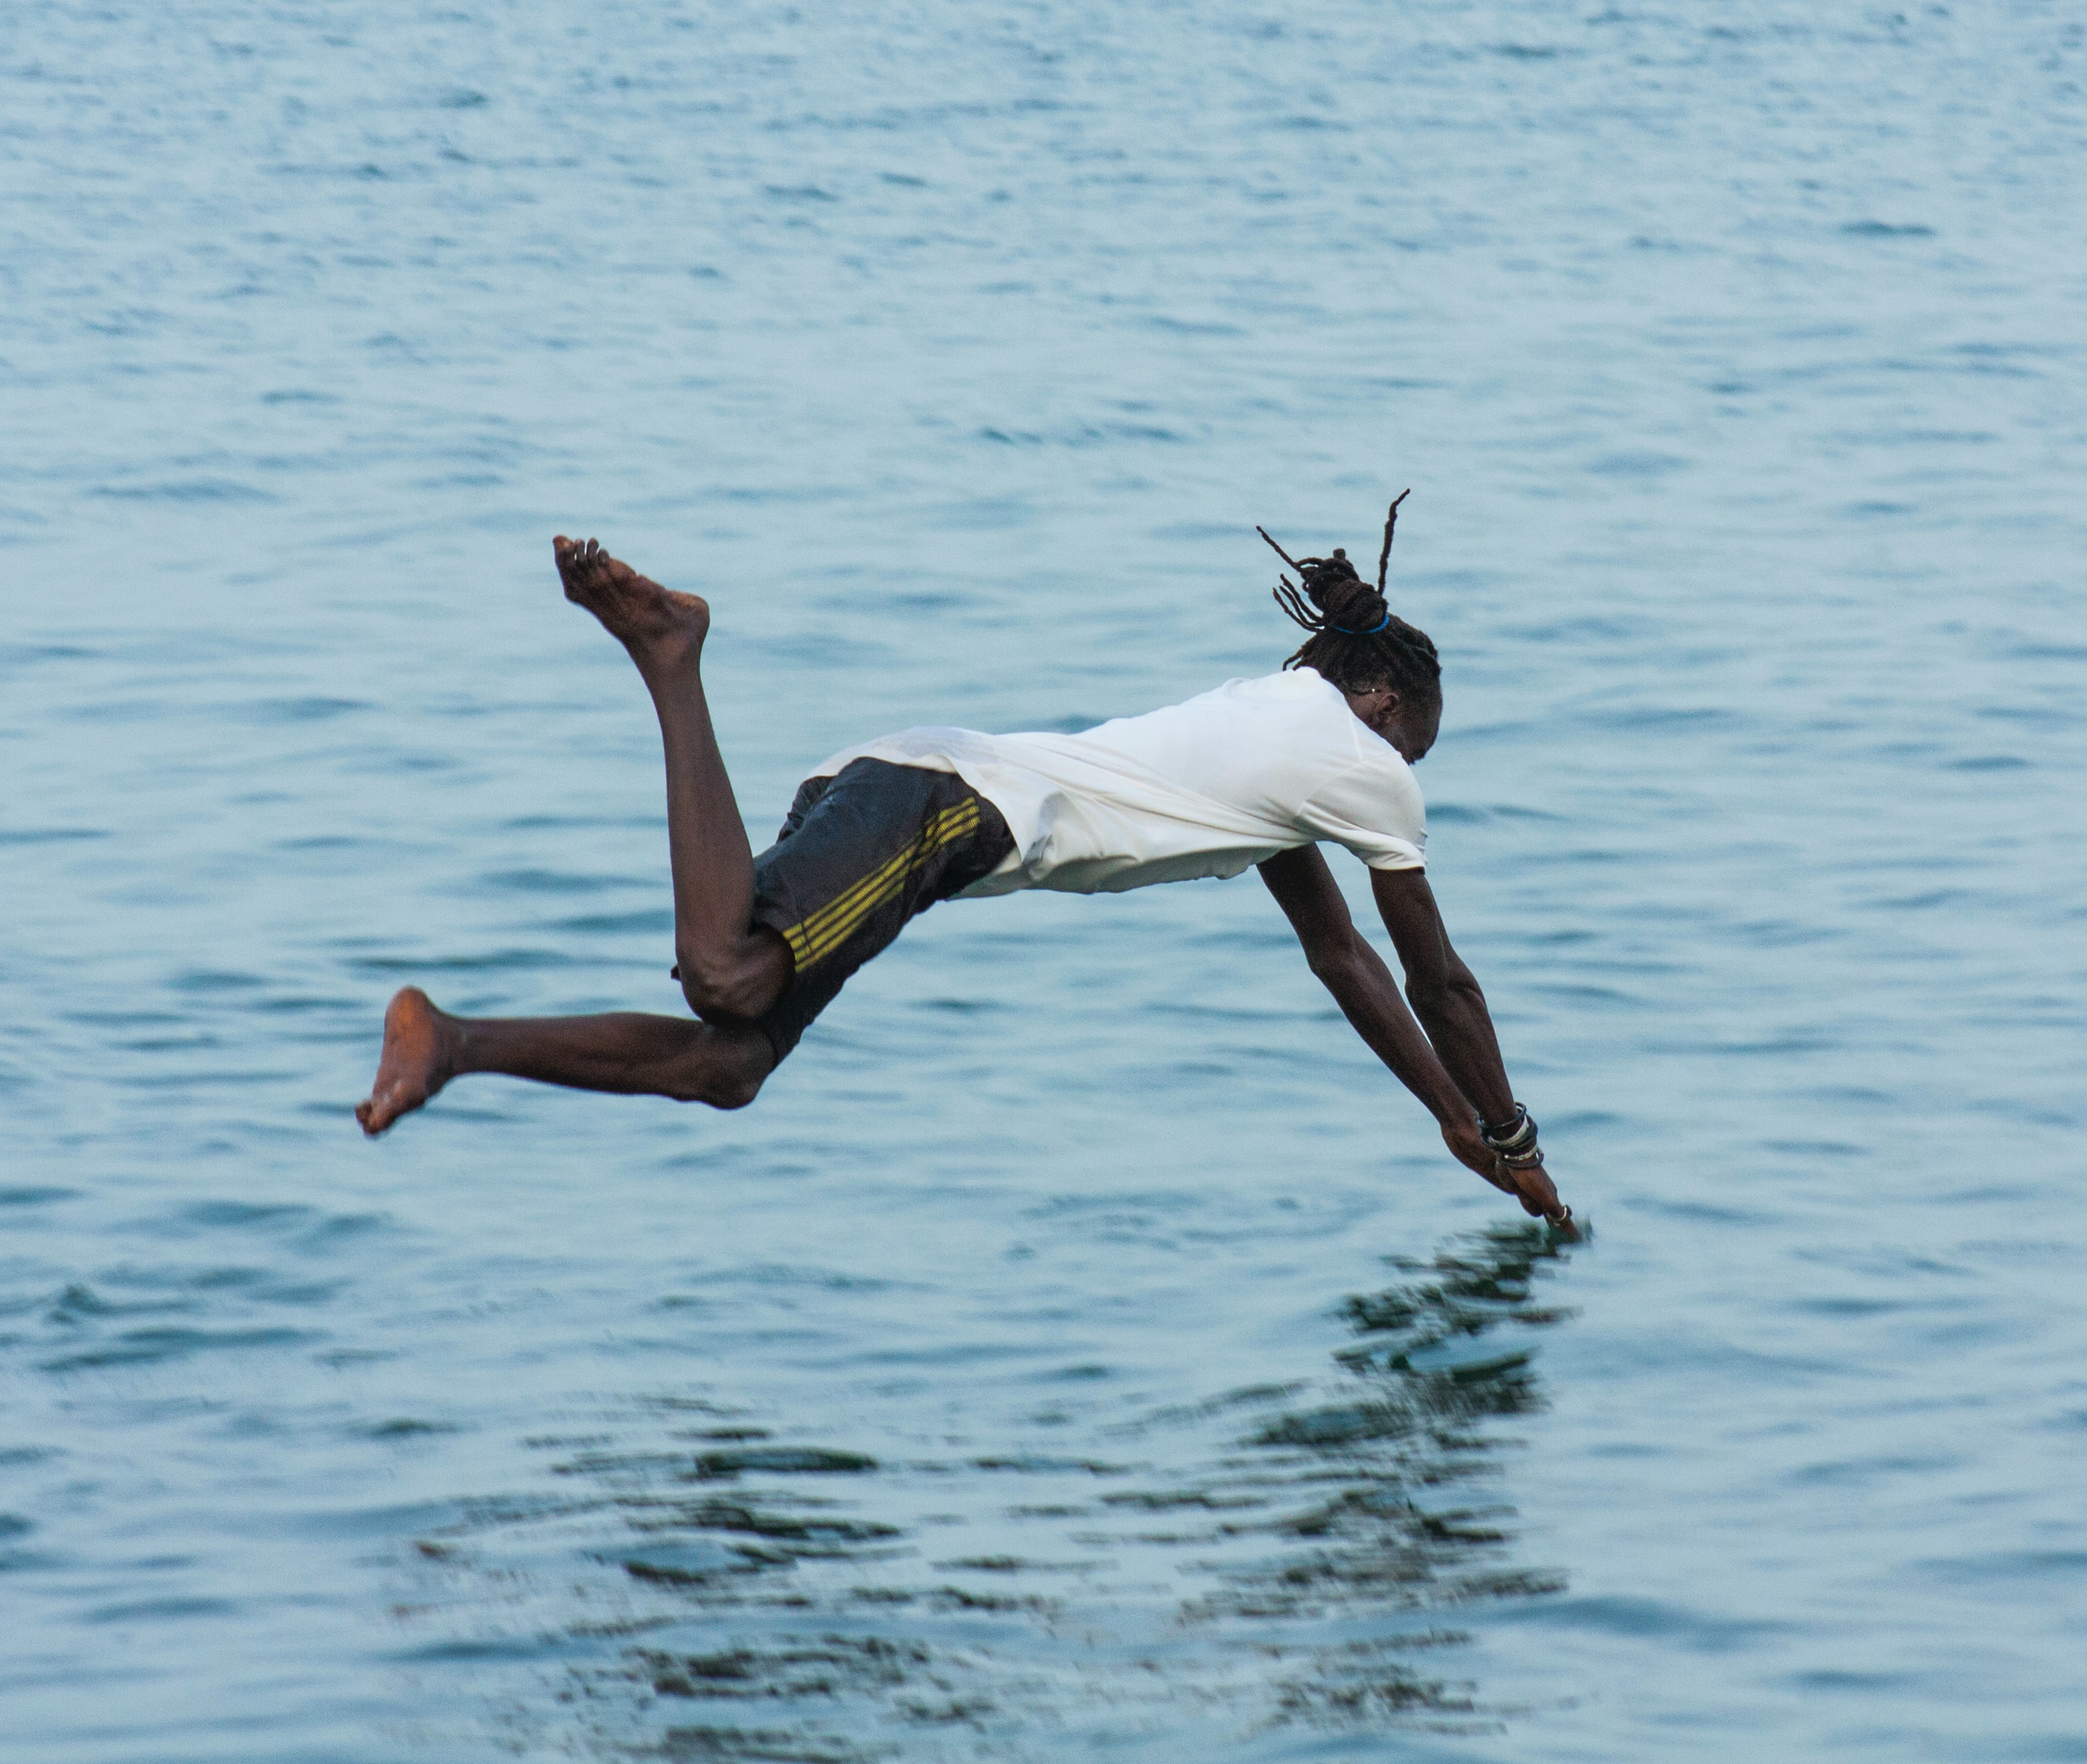 A man diving into, and captured just above, a body of water. His arms are straight, but his legs are bent at different angles. He may do a bellyflop.